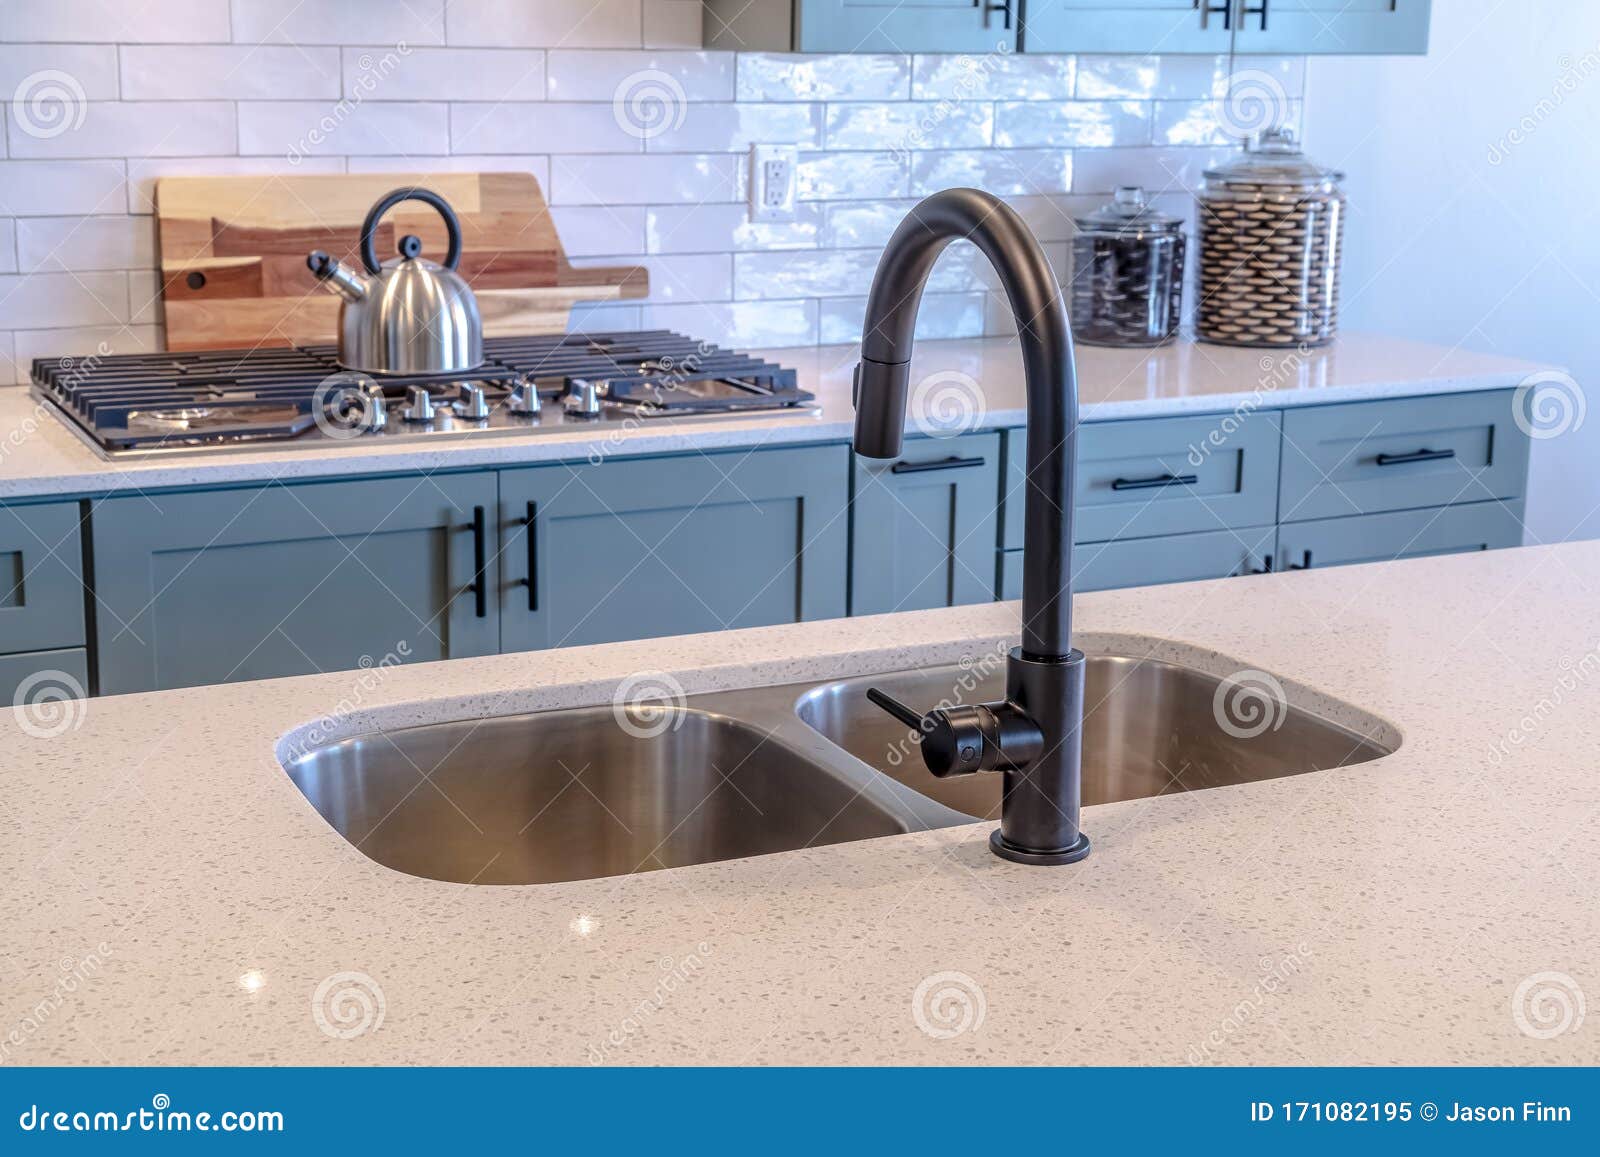 kitchen island sink and faucet